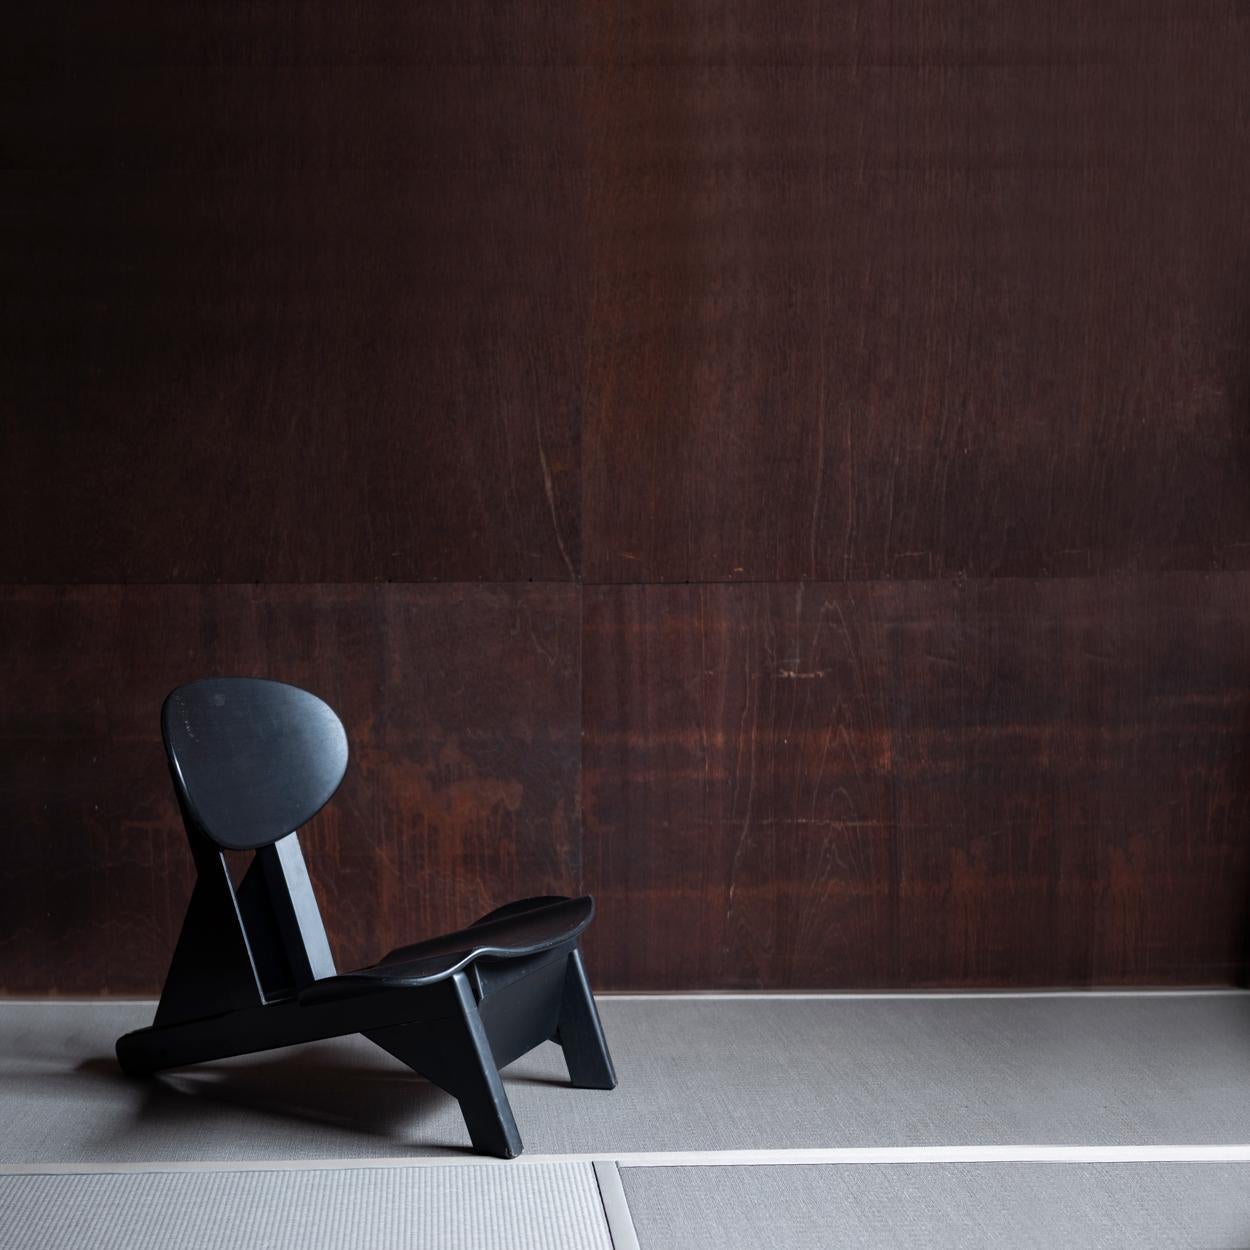 Rare and unique sculptural low chair in black designed by French designer Alain Gaubert.
The chair can be used in 3 different positions; to sit on the chair normally as a low chair, to sit on the back rest then it can be used as a stool, and to sit